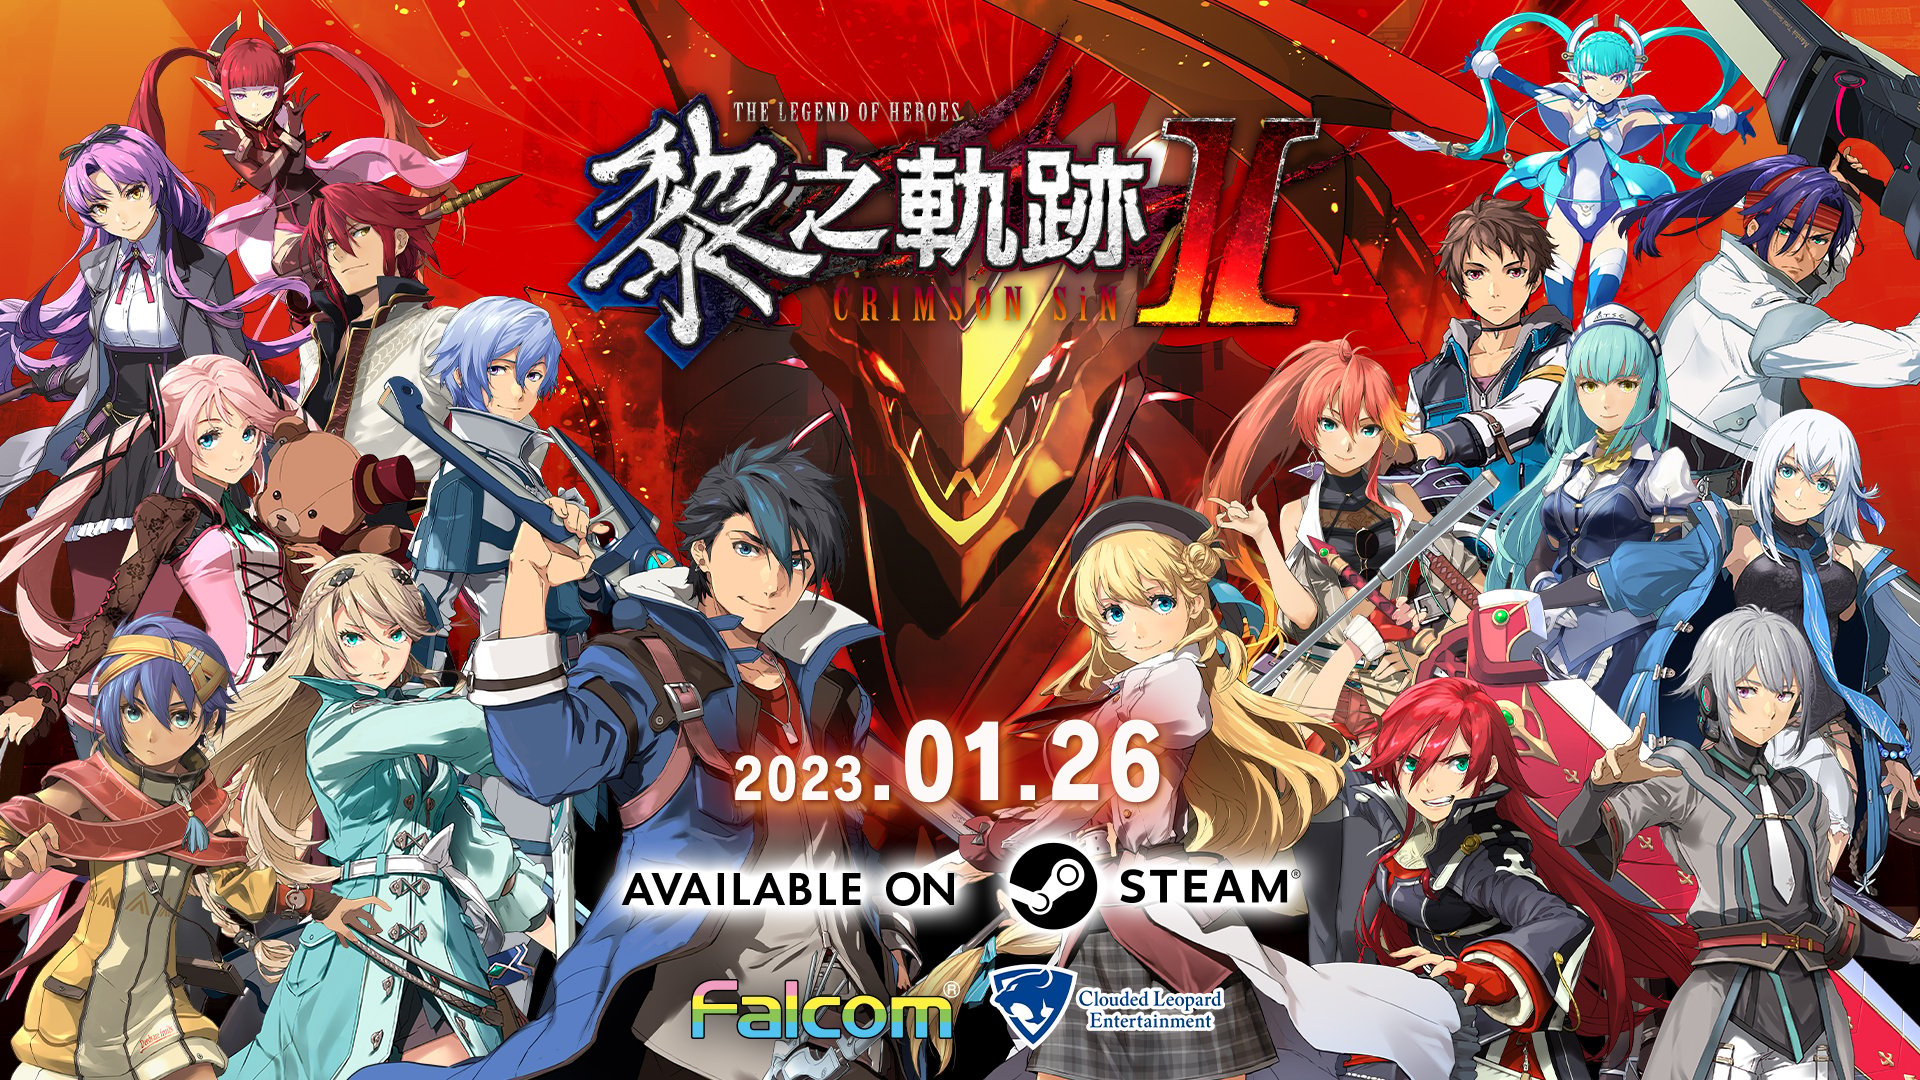 #
      The Legend of Heroes: Kuro no Kiseki II -CRIMSON SiN- coming to PC on January 26, 2023 in Korean and Traditional Chinese